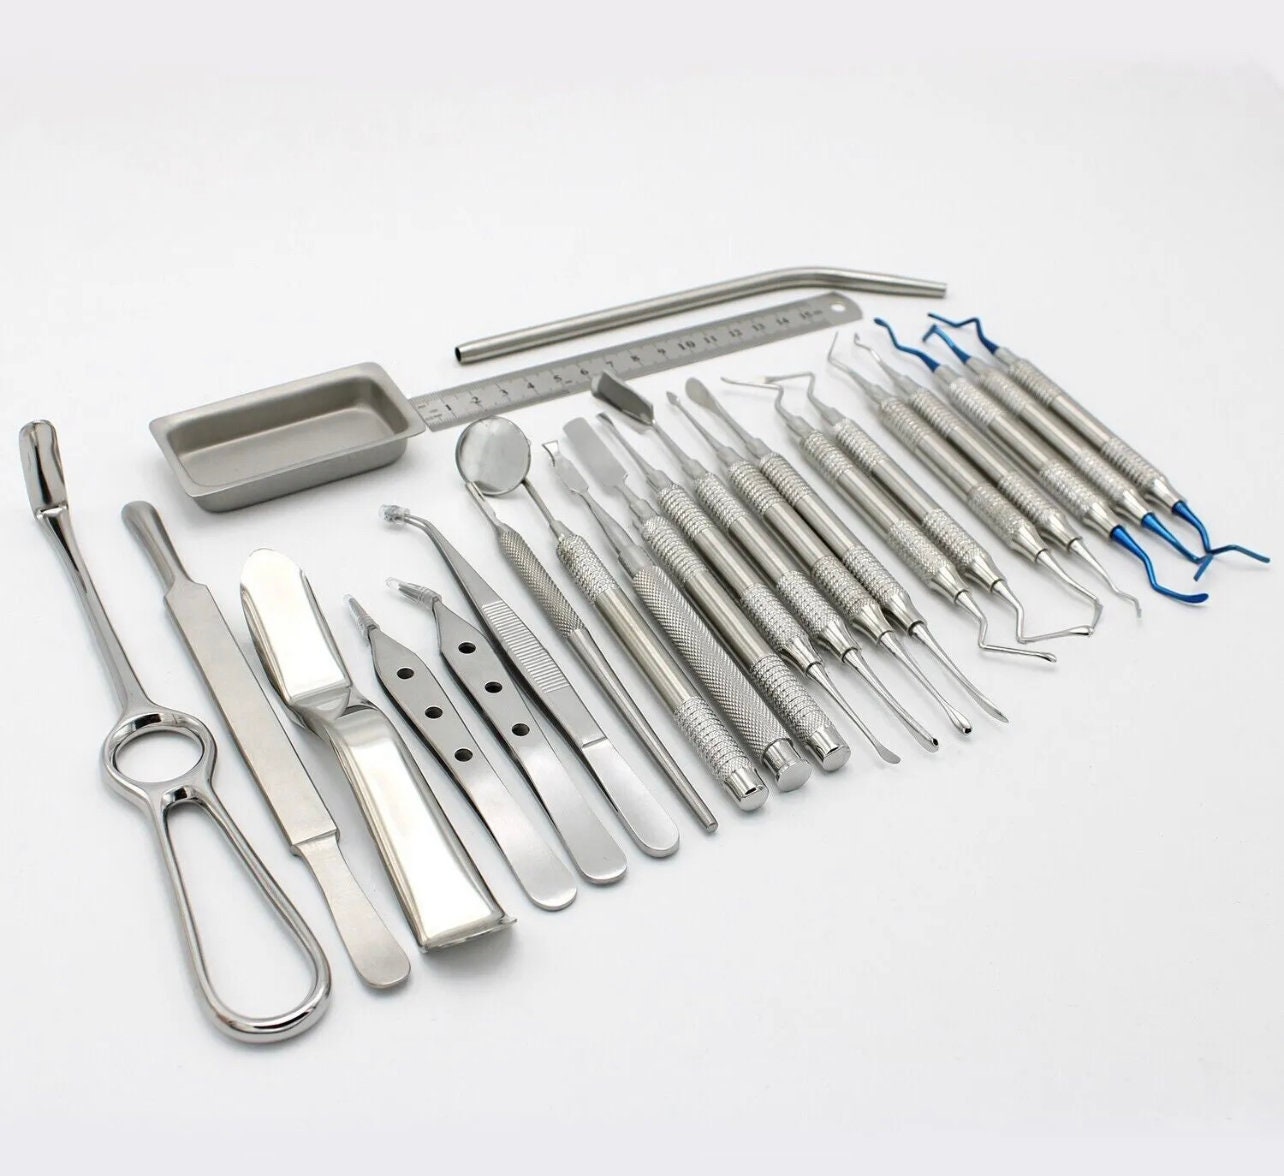 One of the most used Dental Surgical Instruments in the World